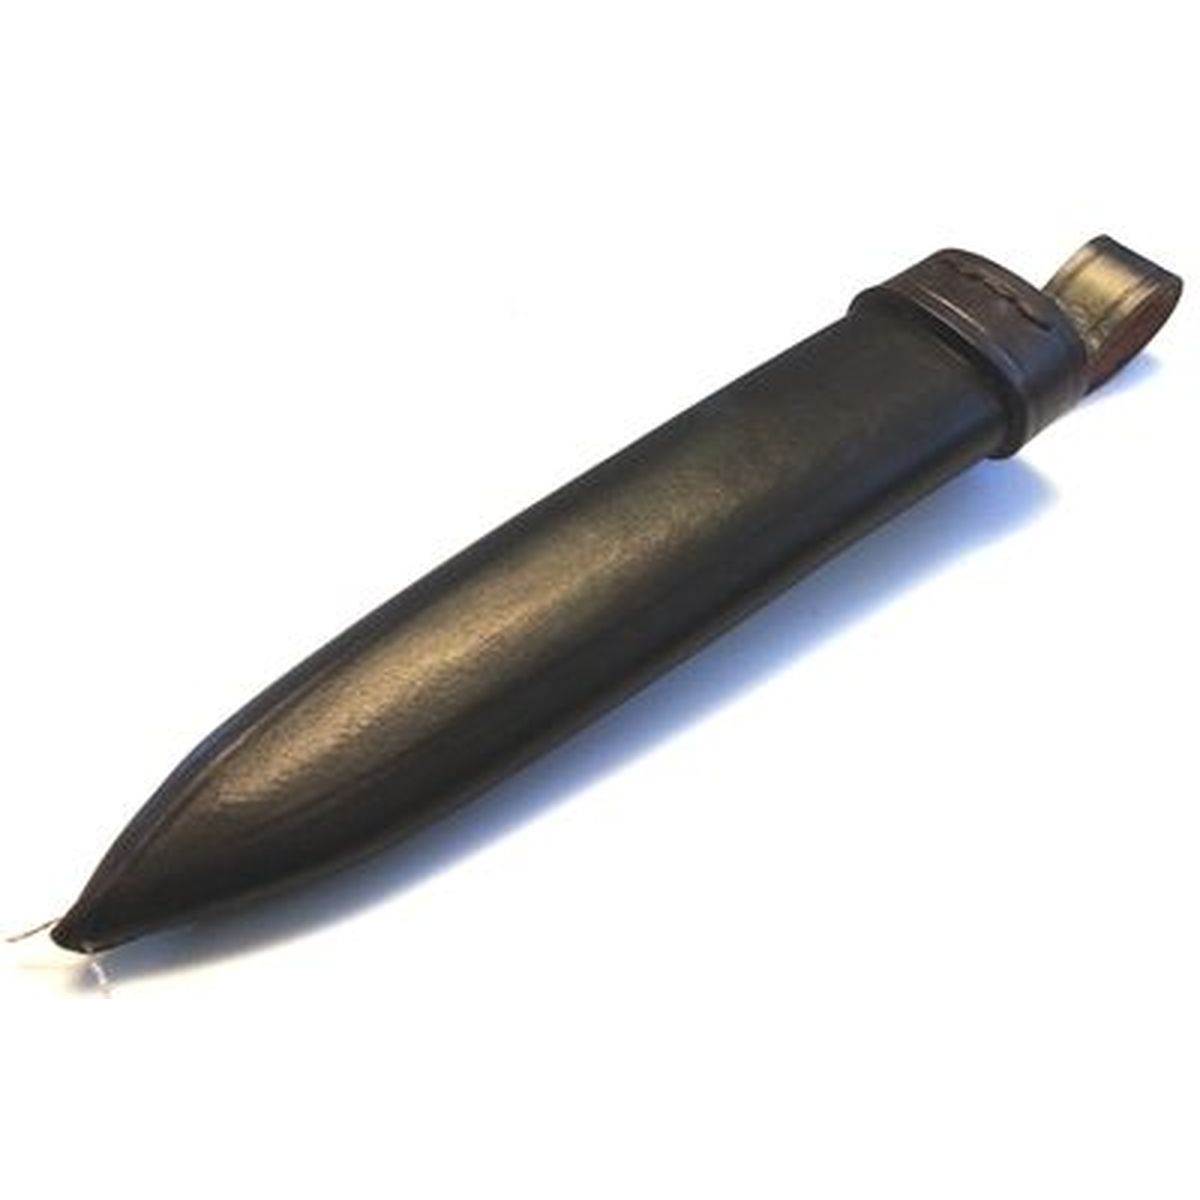 leather sheat for sailor's knife LOEWEN